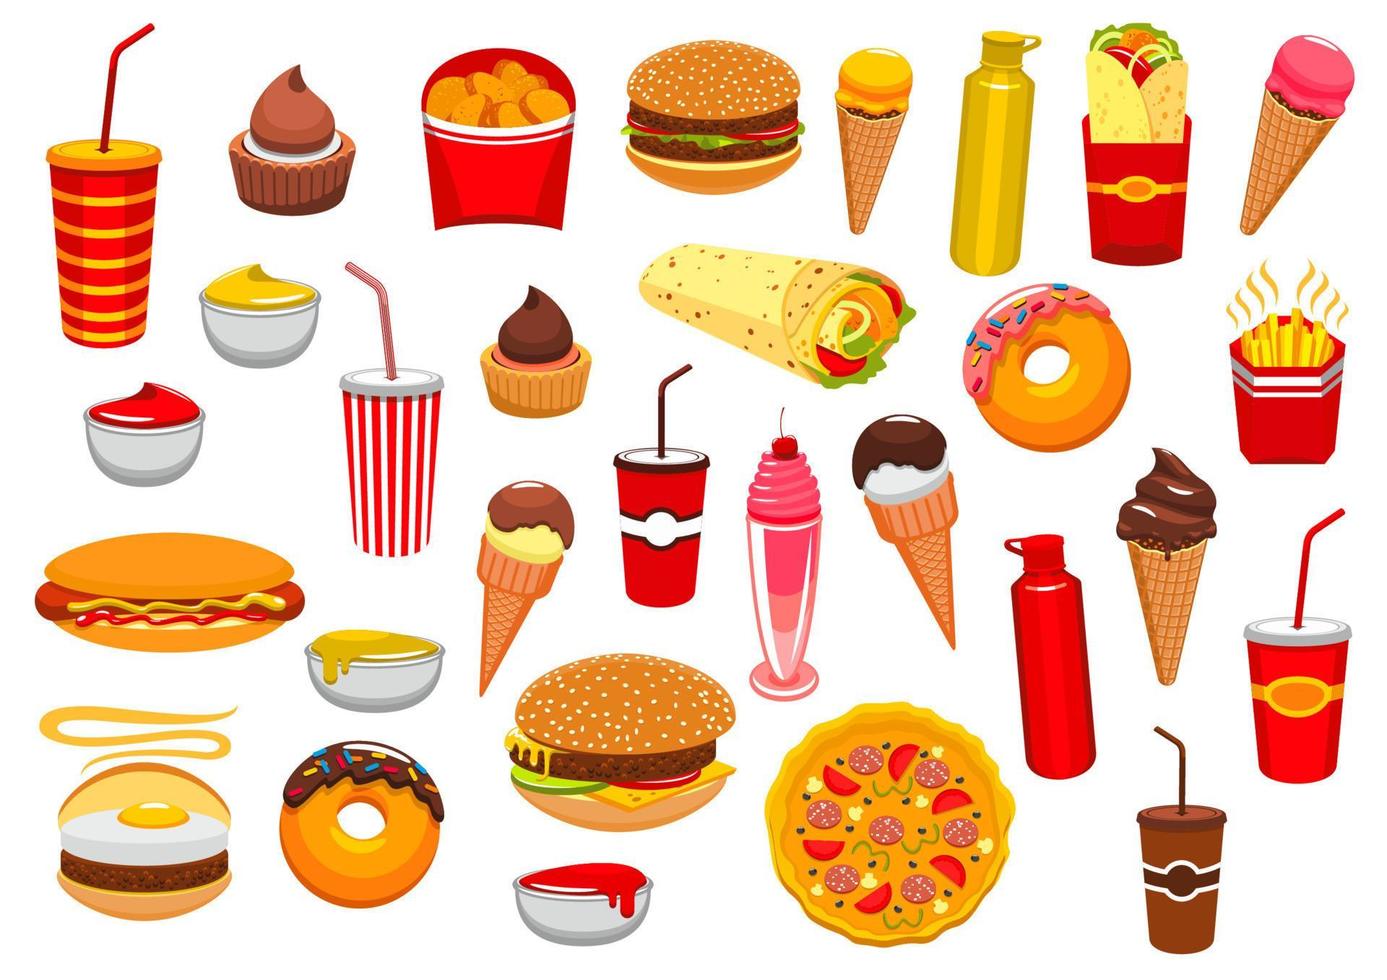 Fast food meal vector isolated icons set